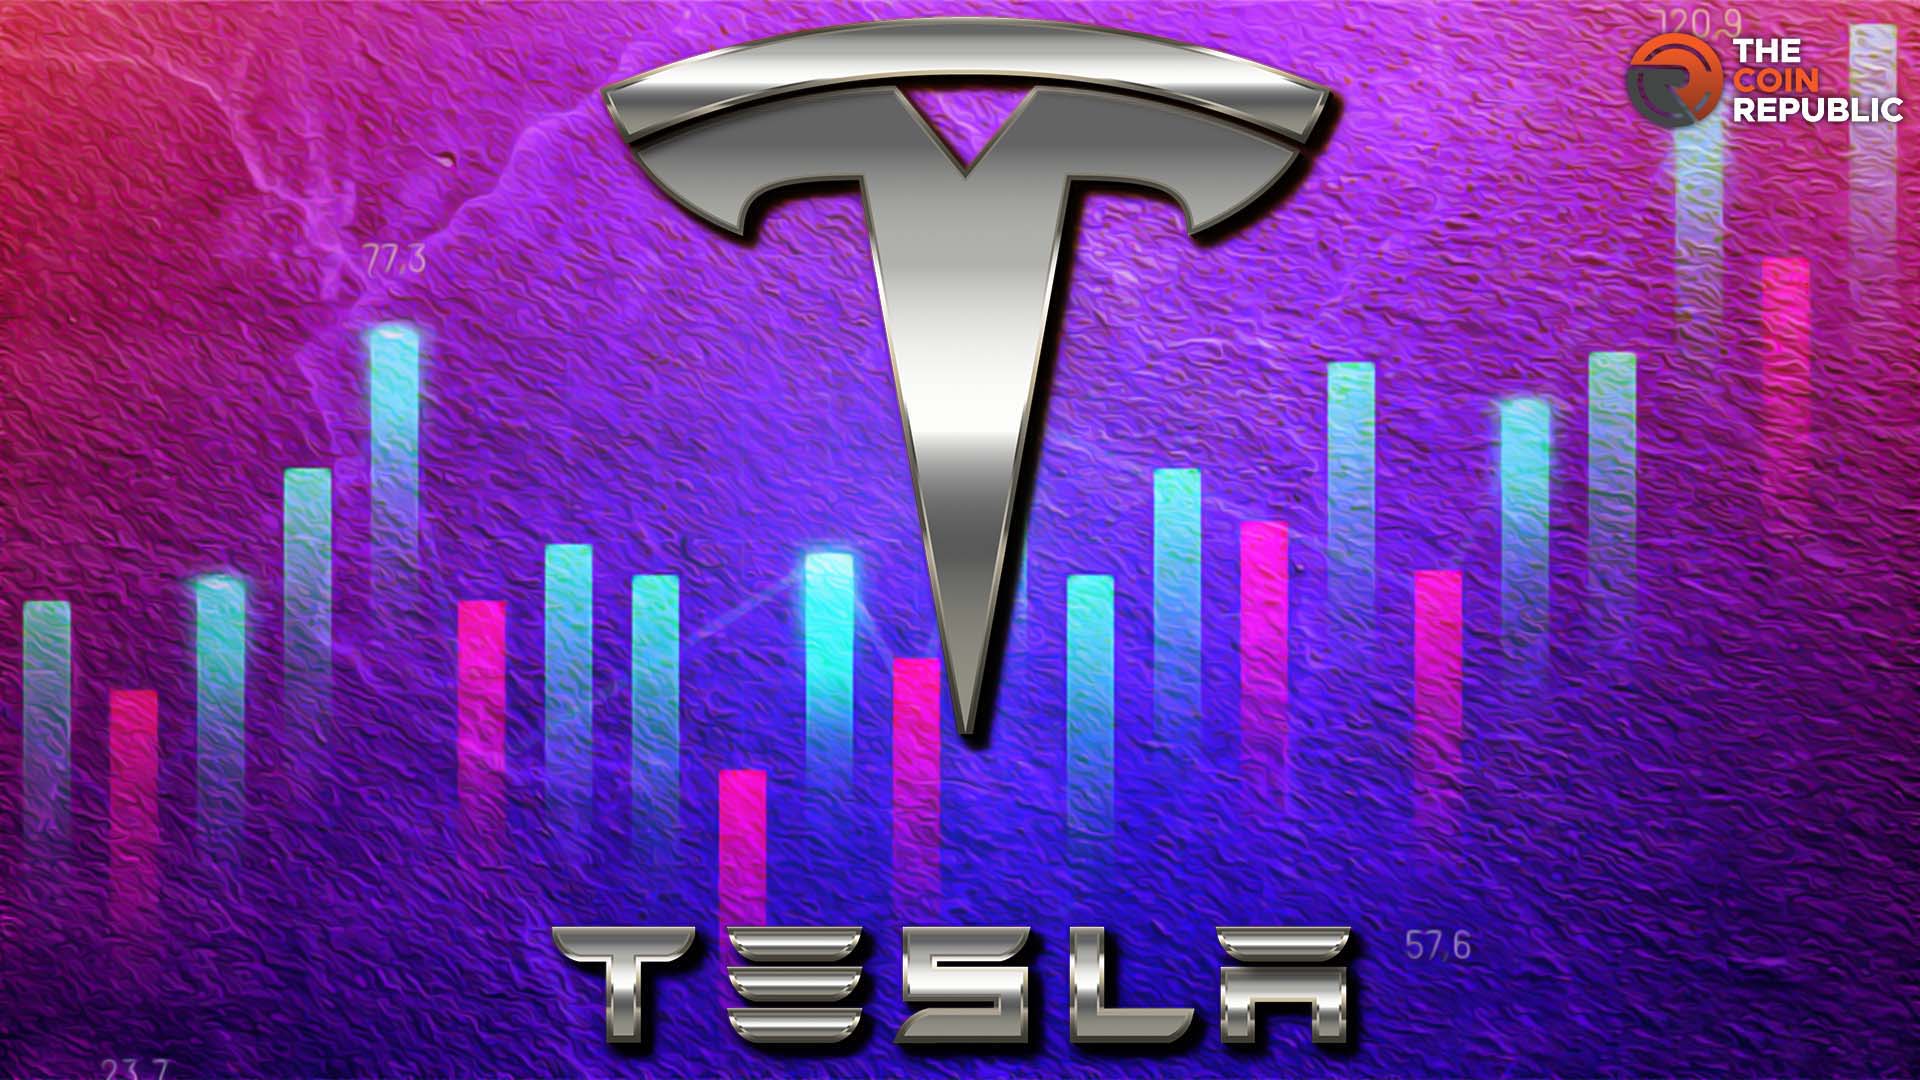 Tesla Stock Price Shows Bullish Outlook with YTD Price Growth